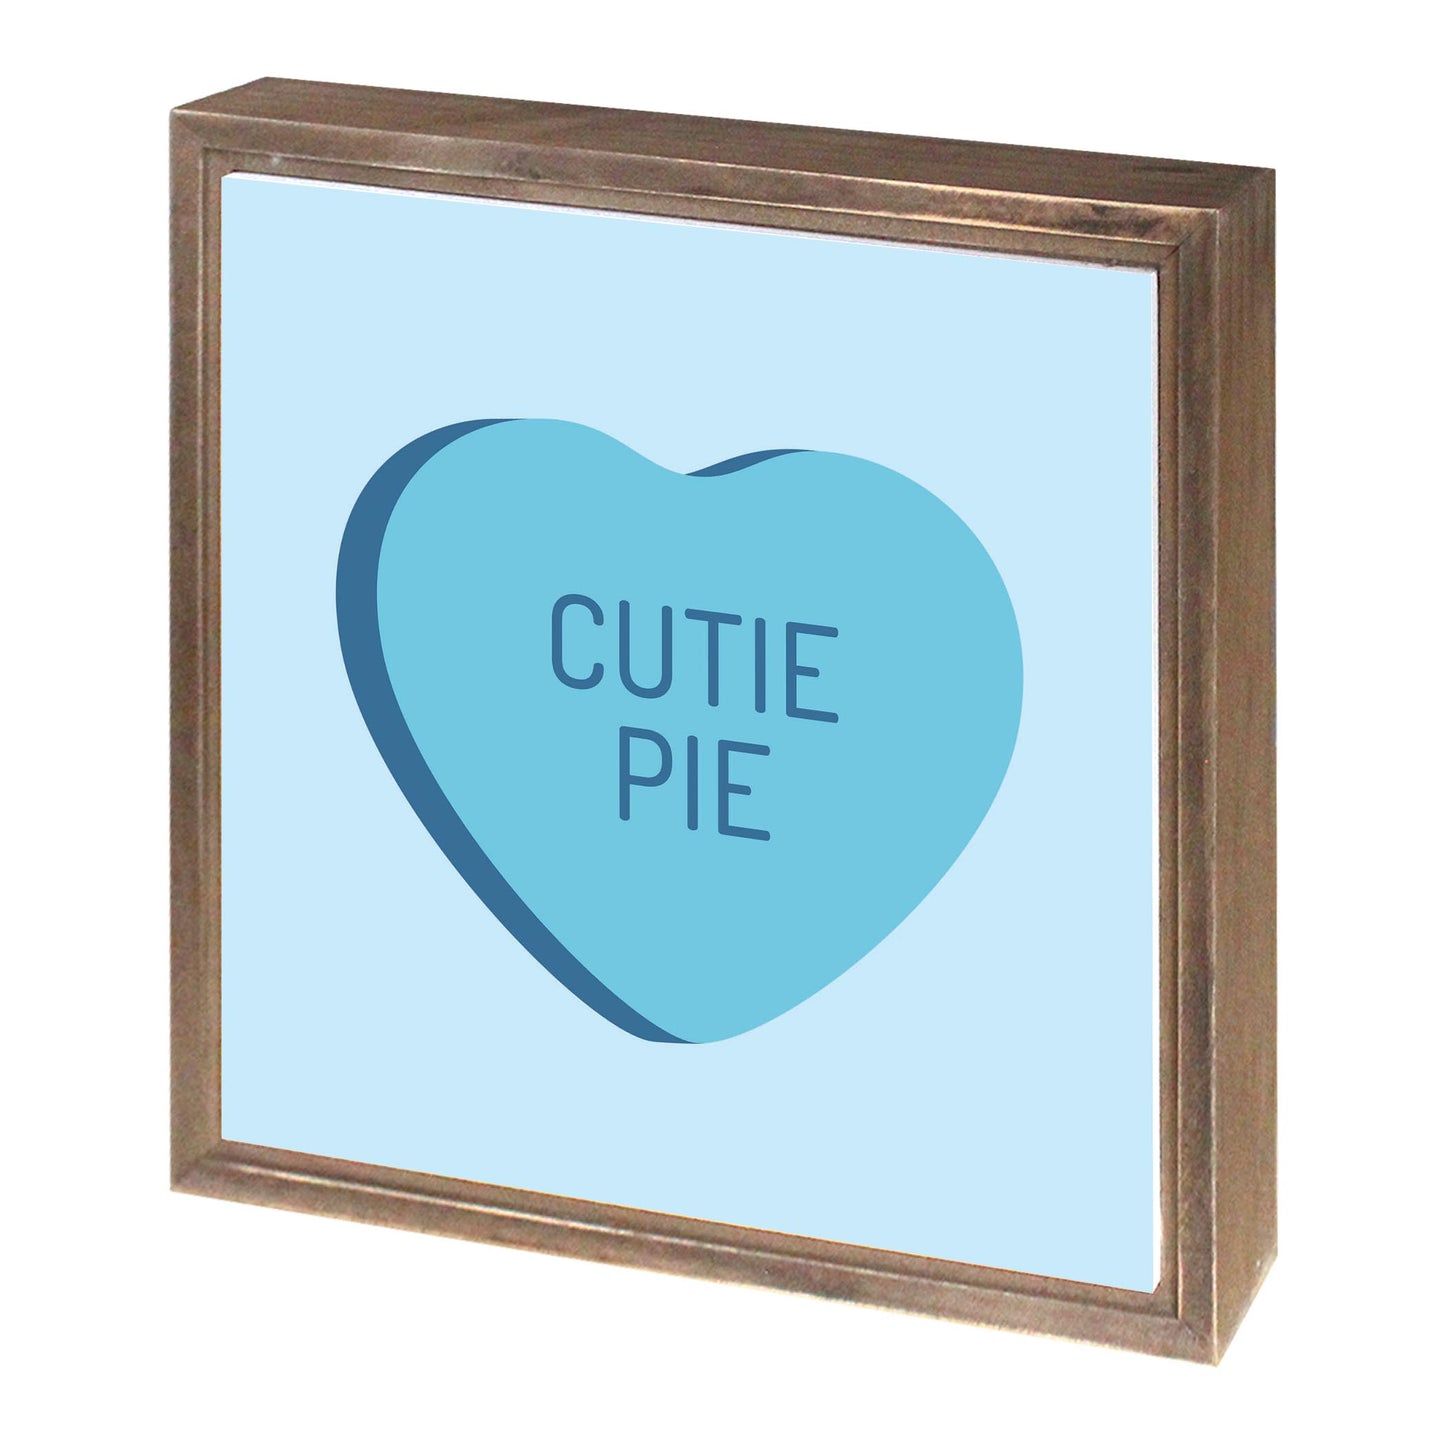 Message Hearts Cutie Pie | Wood Sign | Eaches | Min 1